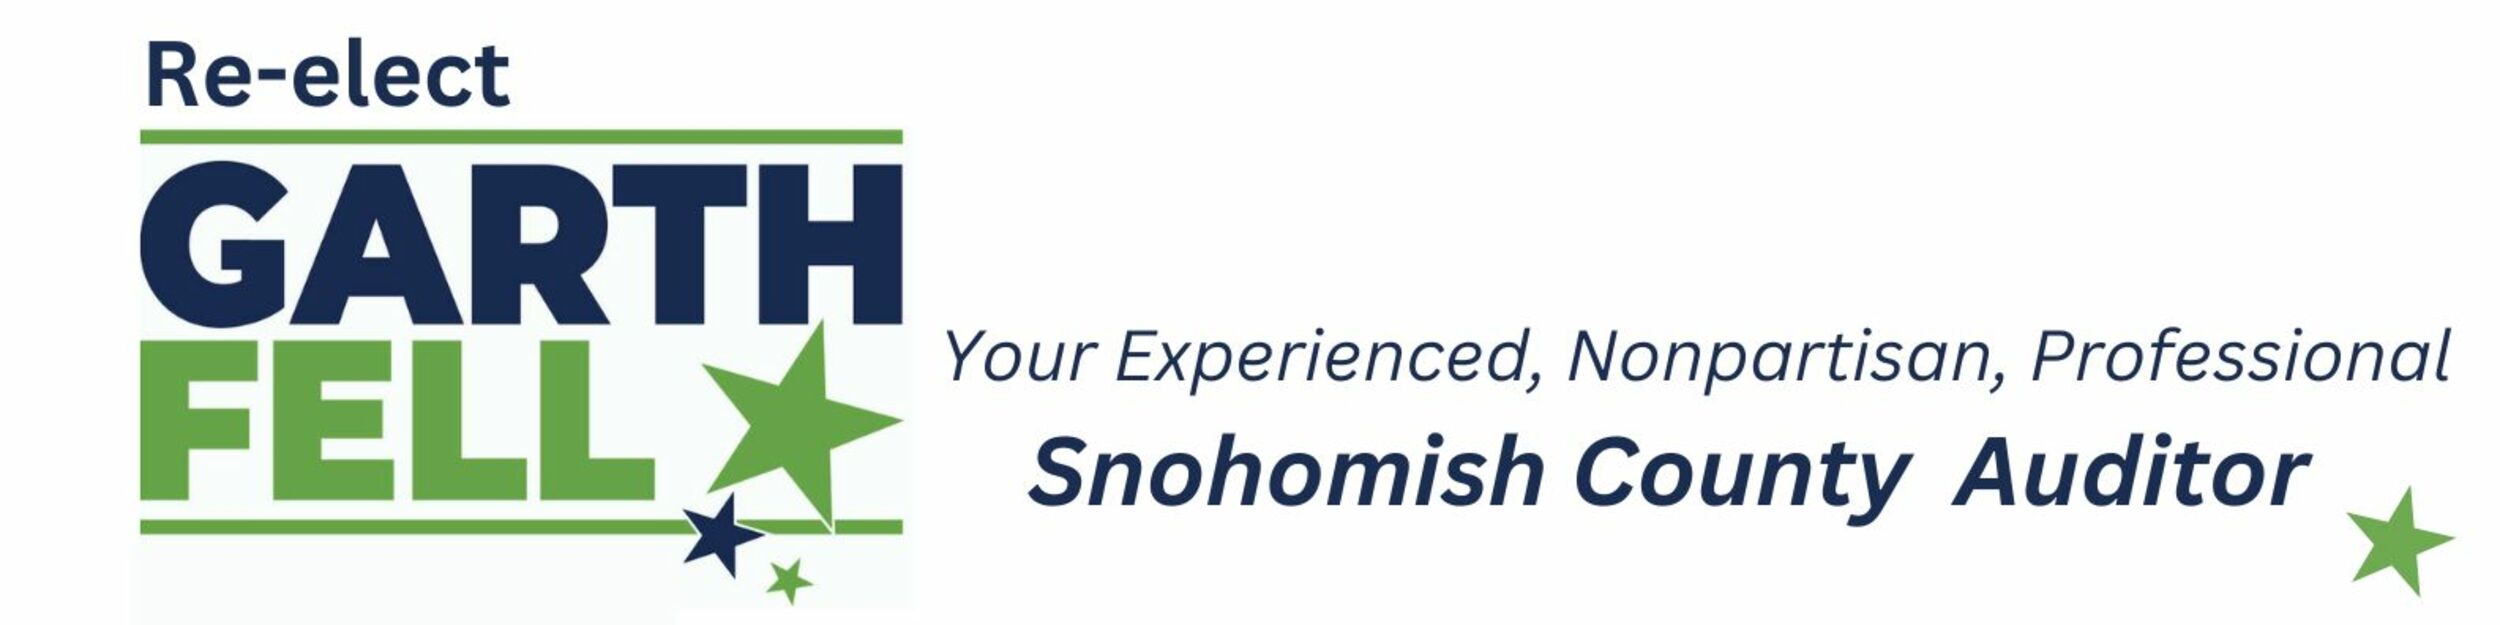 Re-elect Garth Fell Snohomish County Auditor logo